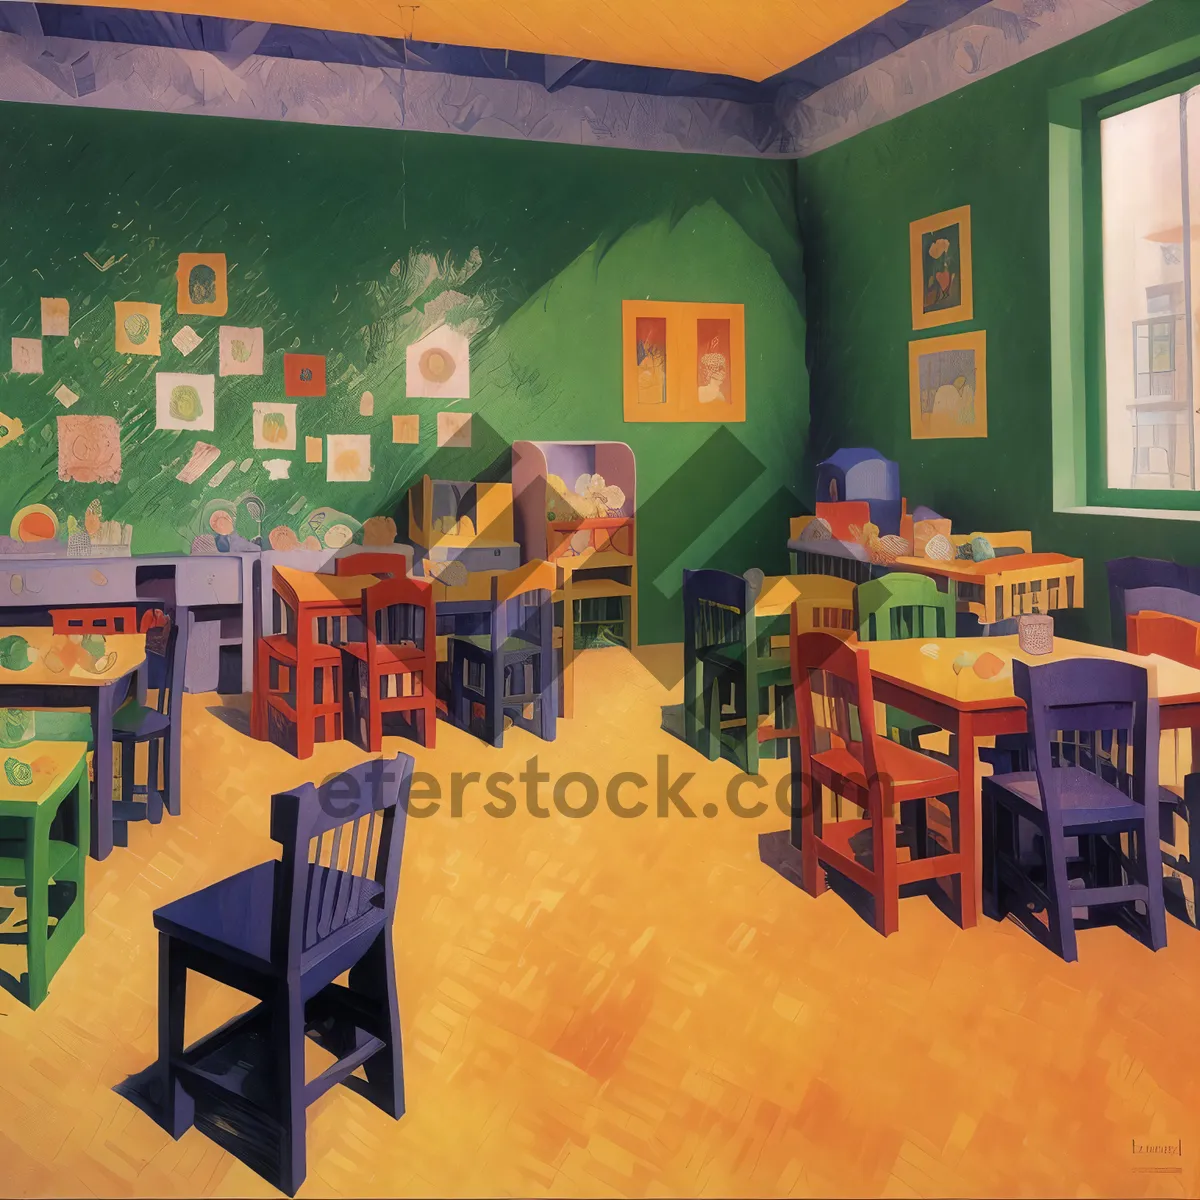 Picture of Modern Classroom with Stylish Furniture and Natural Lighting